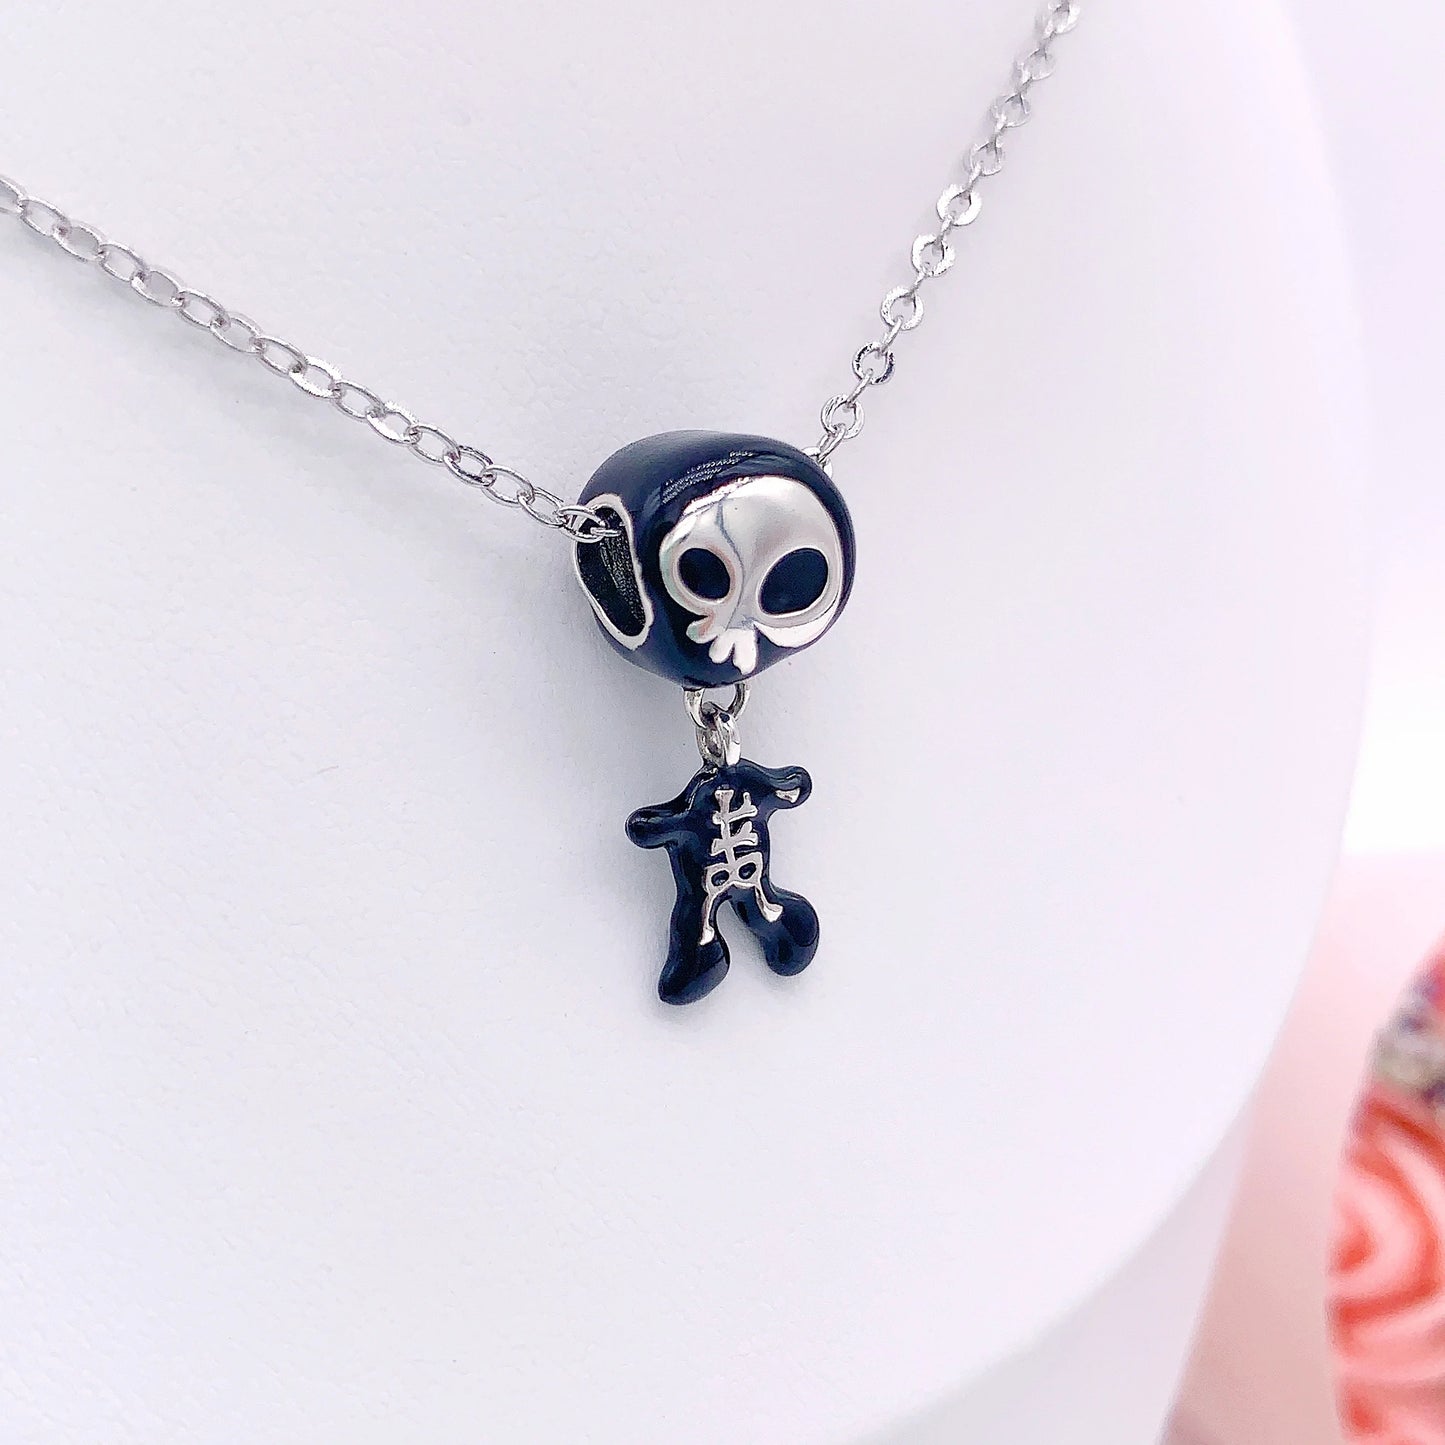 Jewelry - Horror - Gothic - Skull - Grim Reaper - Pandora Style Charms or Pendants